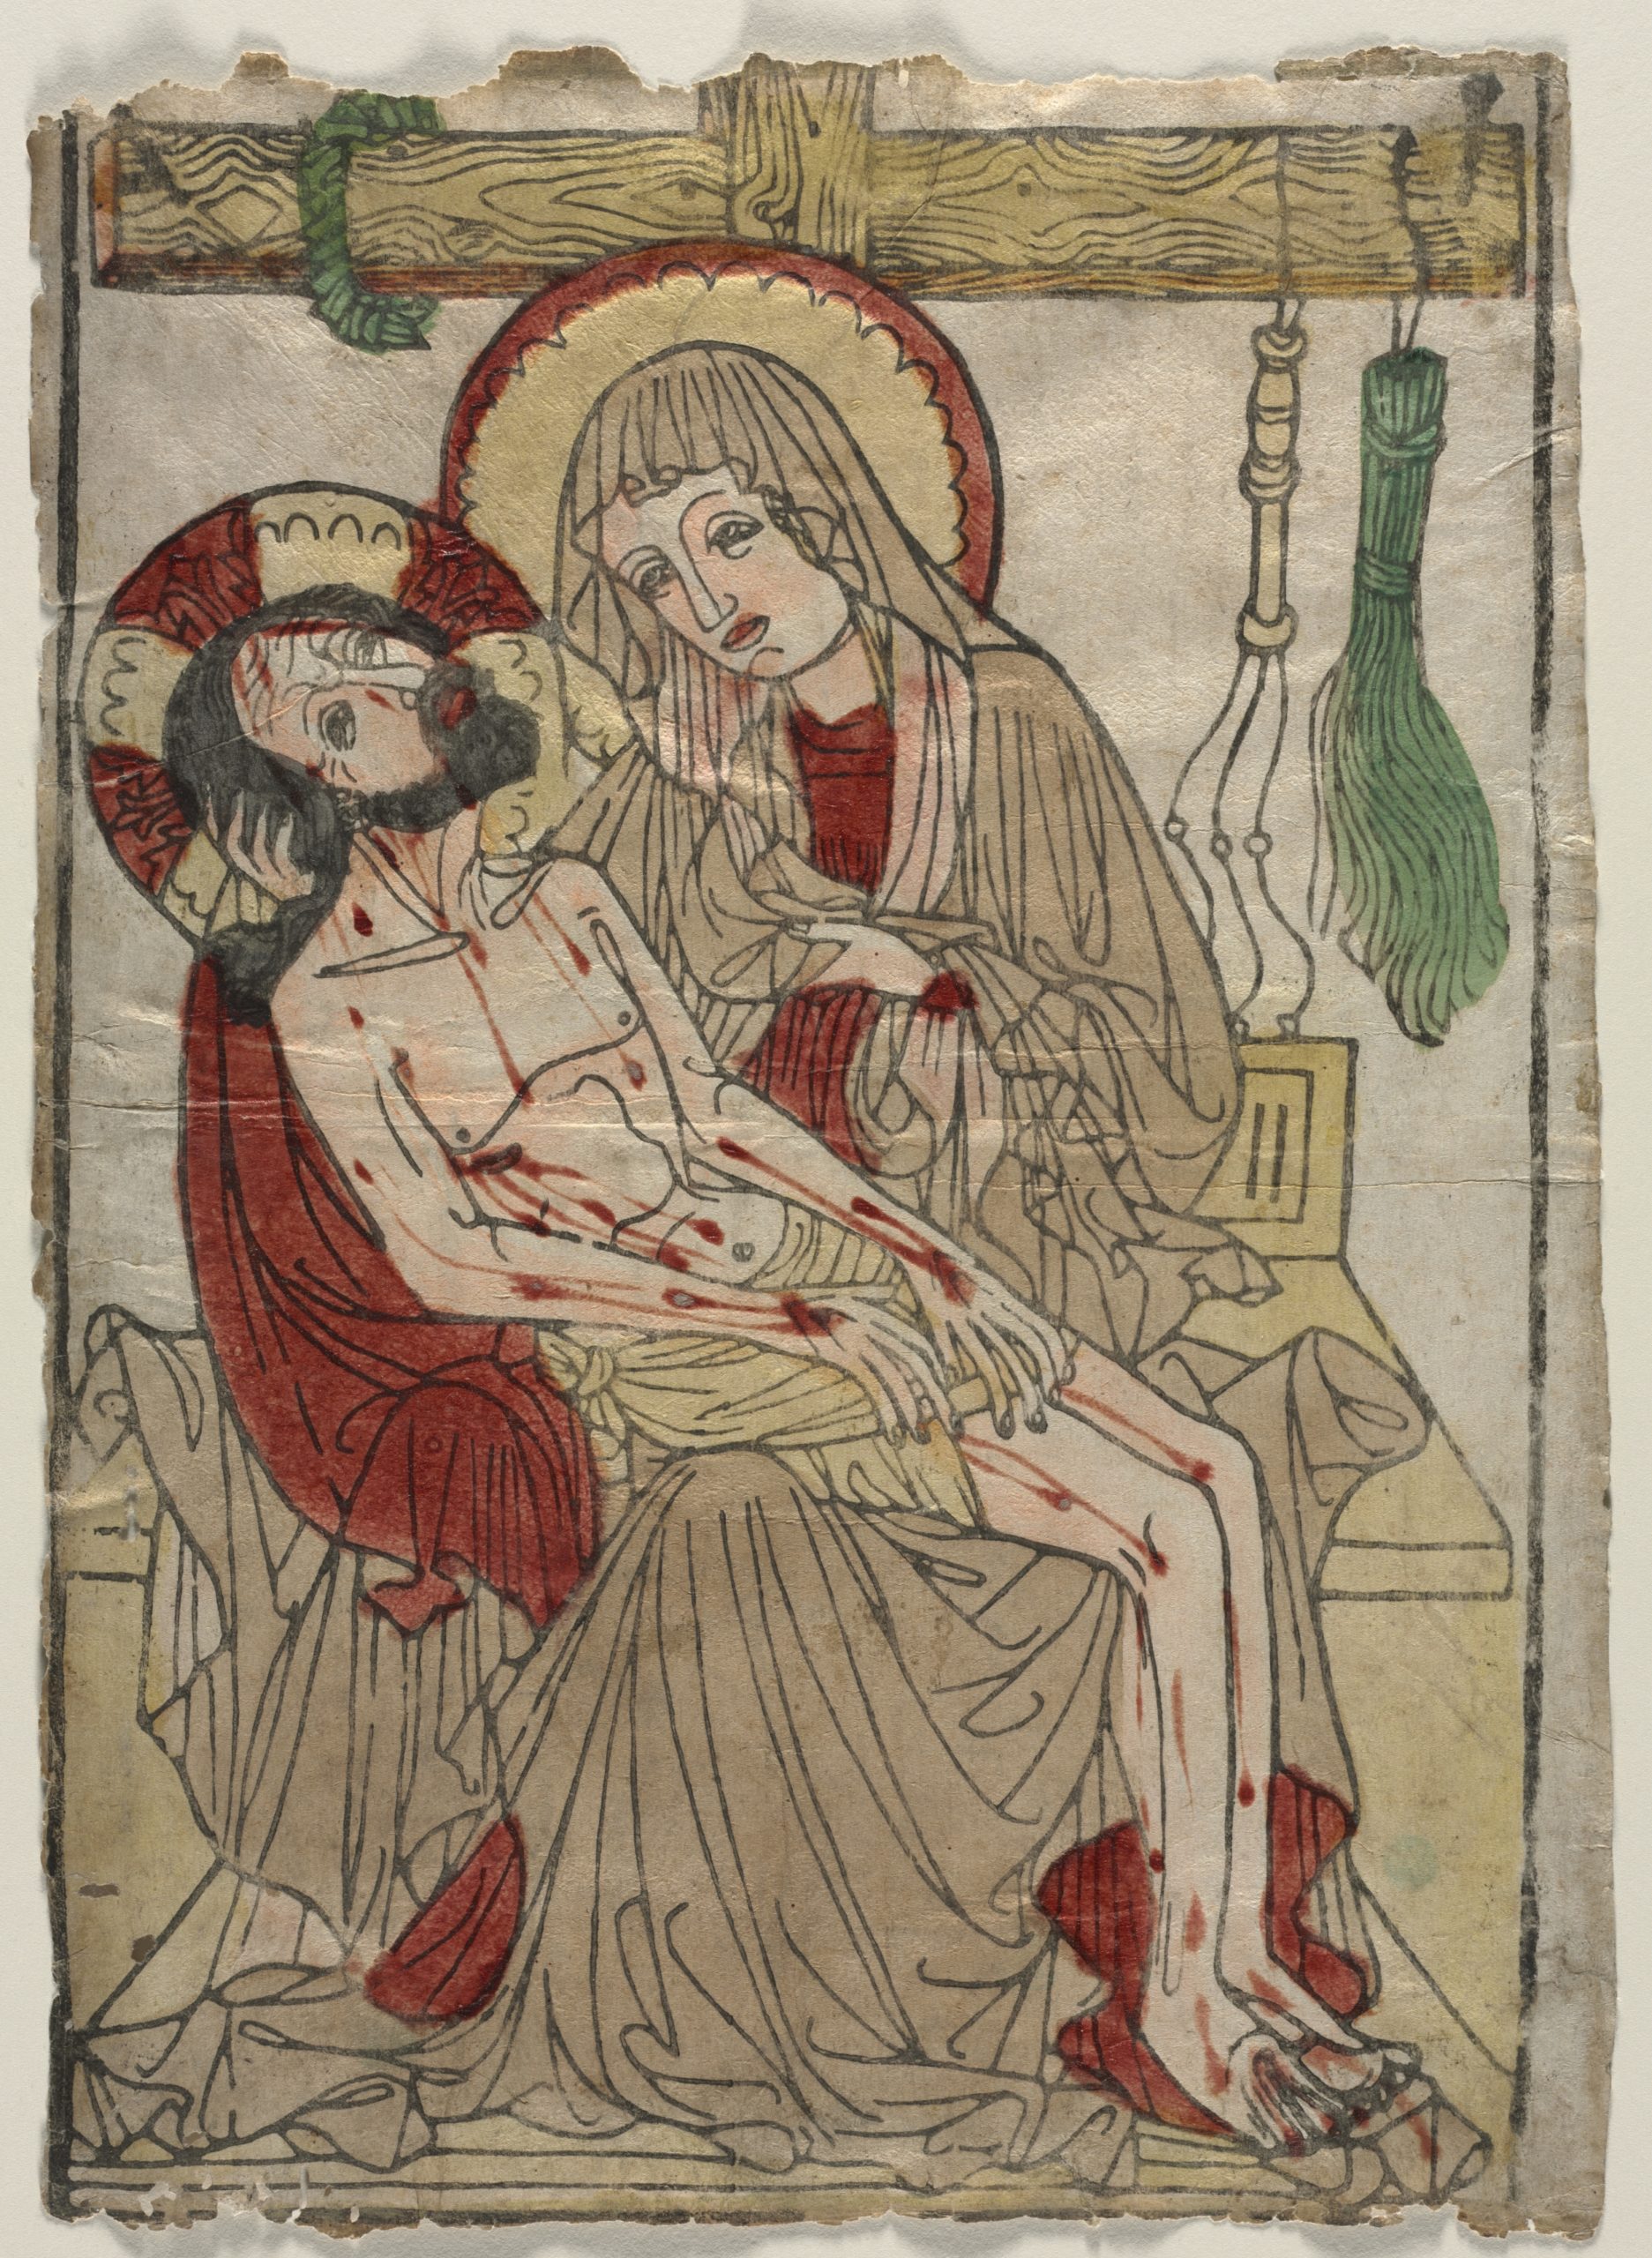 Southern Germany, Swabia, Pietà, ca. 1460, woodcut, hand colored with watercolor, 38.7 x 28.8 cm (Cleveland Museum of Art, Cleveland 2002.4)